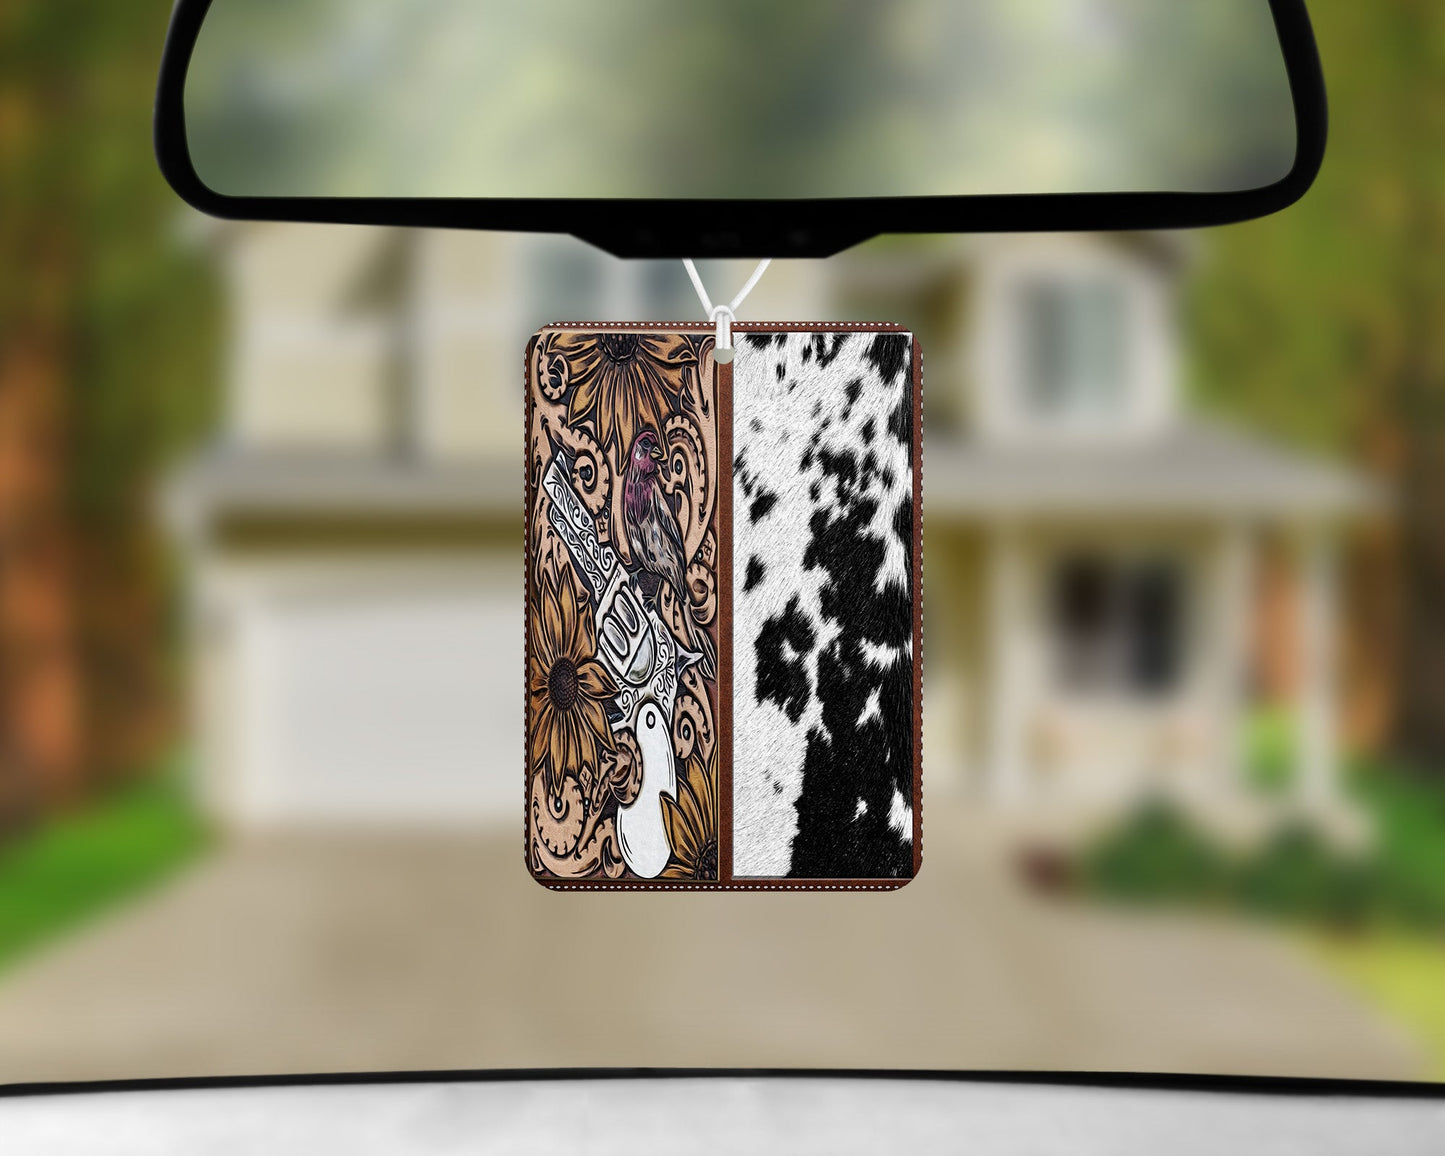 Leather Pistol Cowhide|Freshie|Includes Scent Bottle - Vehicle Air Freshener